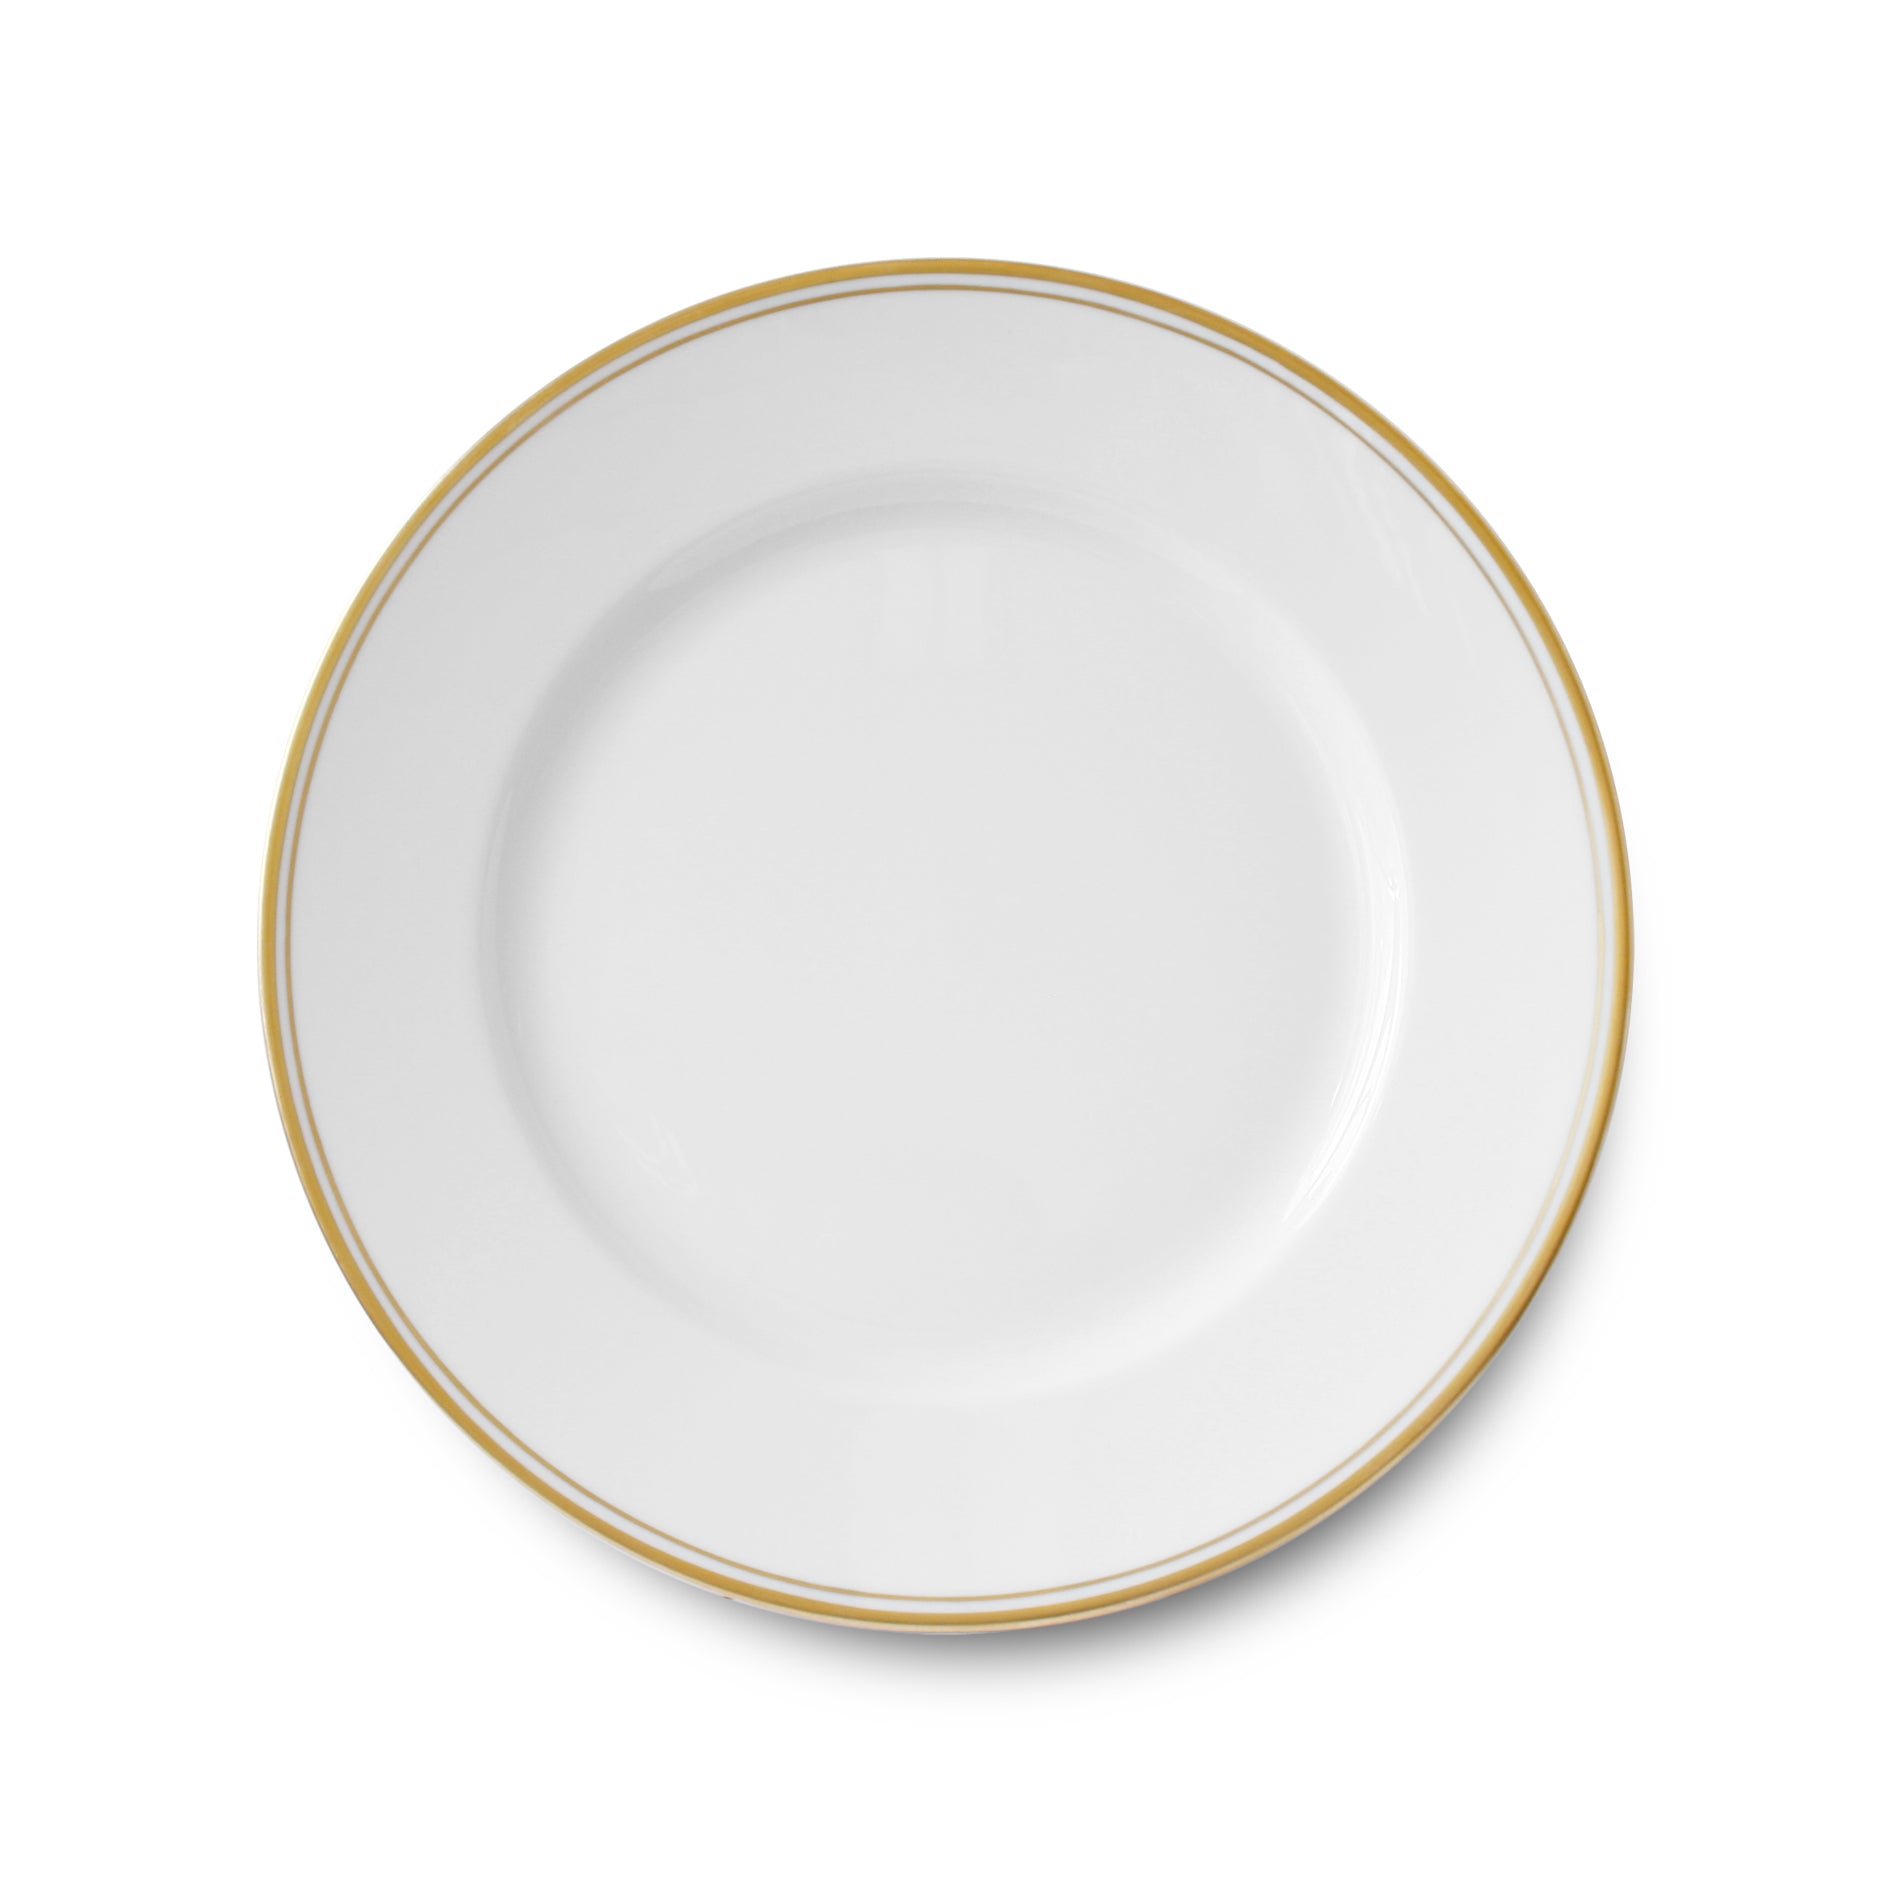 Double filet or - Dinner plate